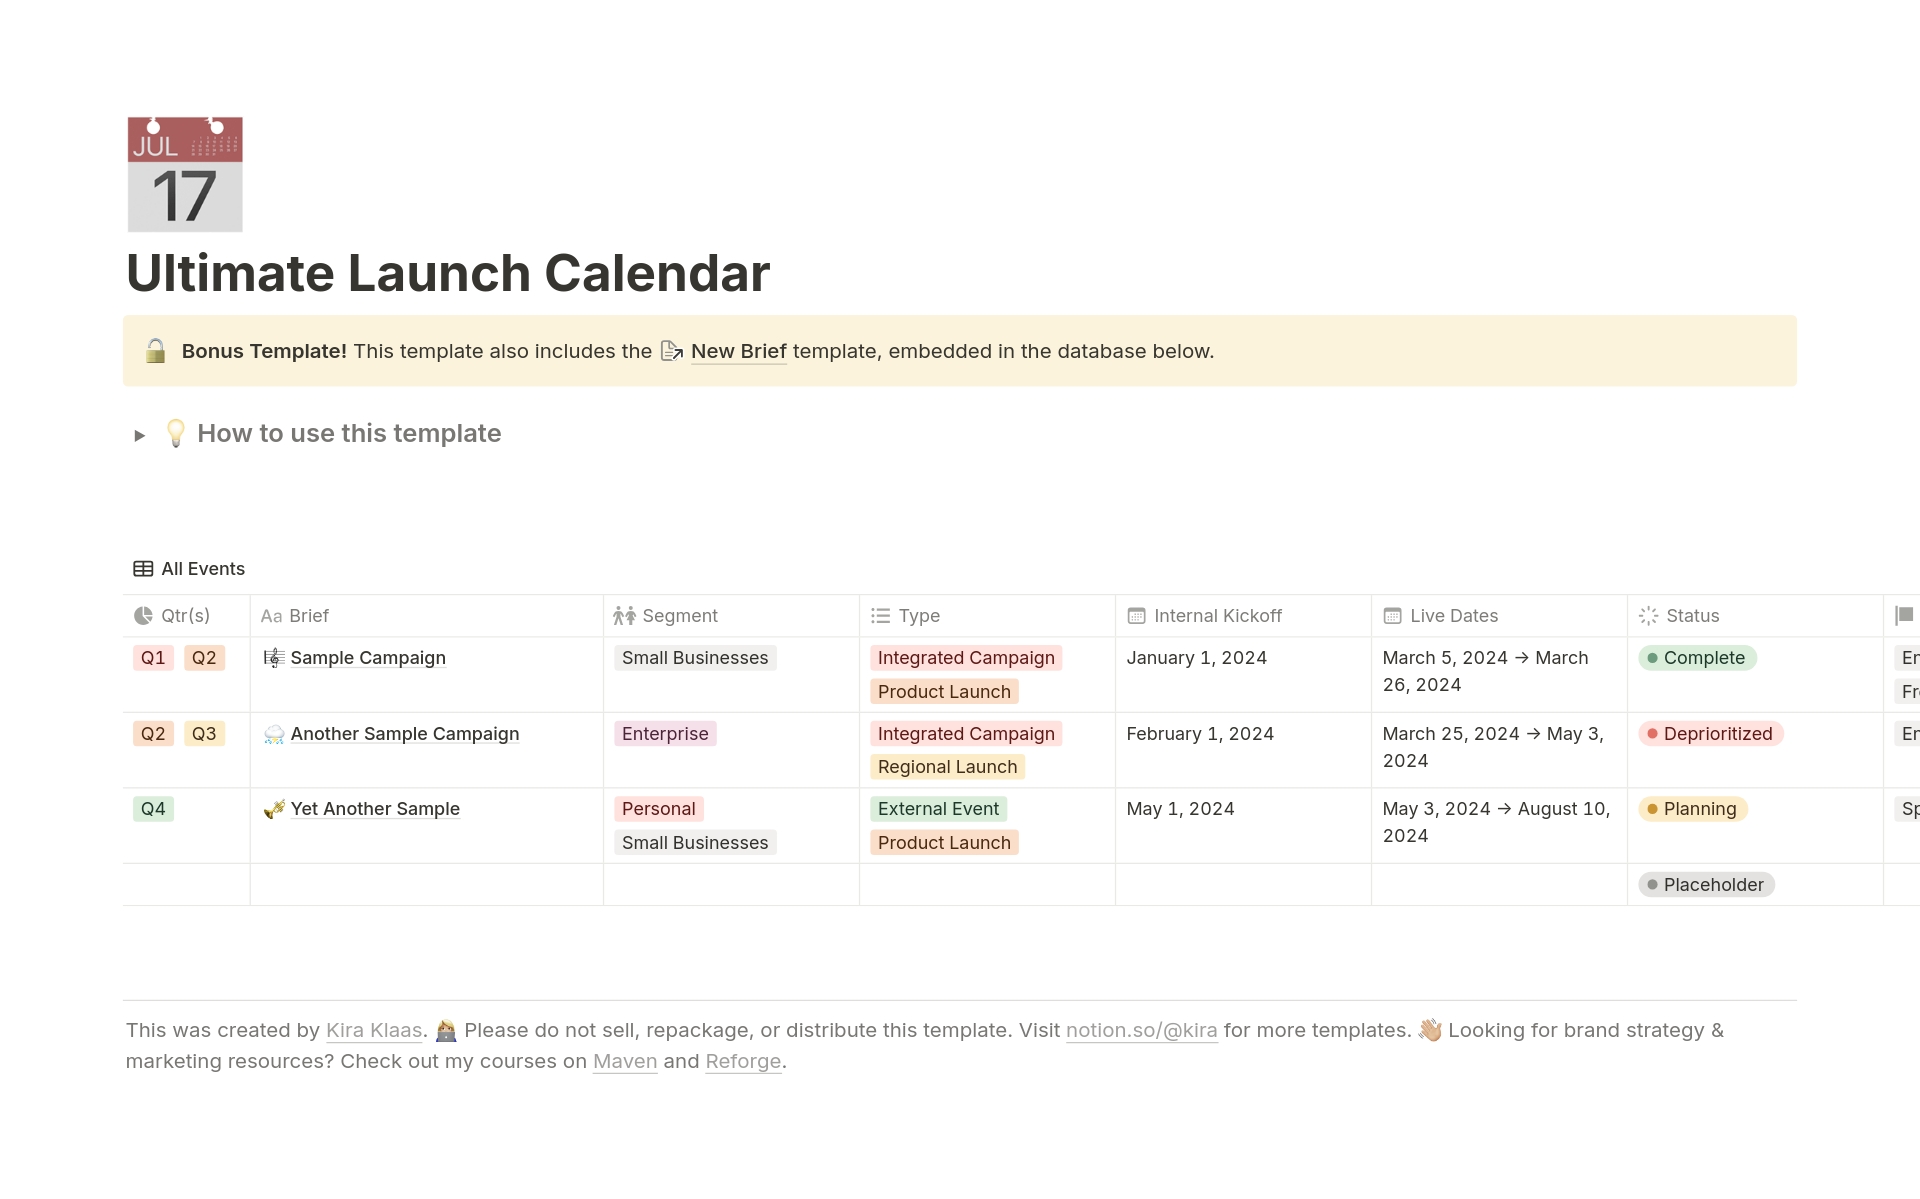 This launch calendar doubles as a project management database, giving you and your entire organization a clear view of every major customer-facing campaign, launch, or event, and also contains robust brief template to help you project manage your launches cross-functionally.